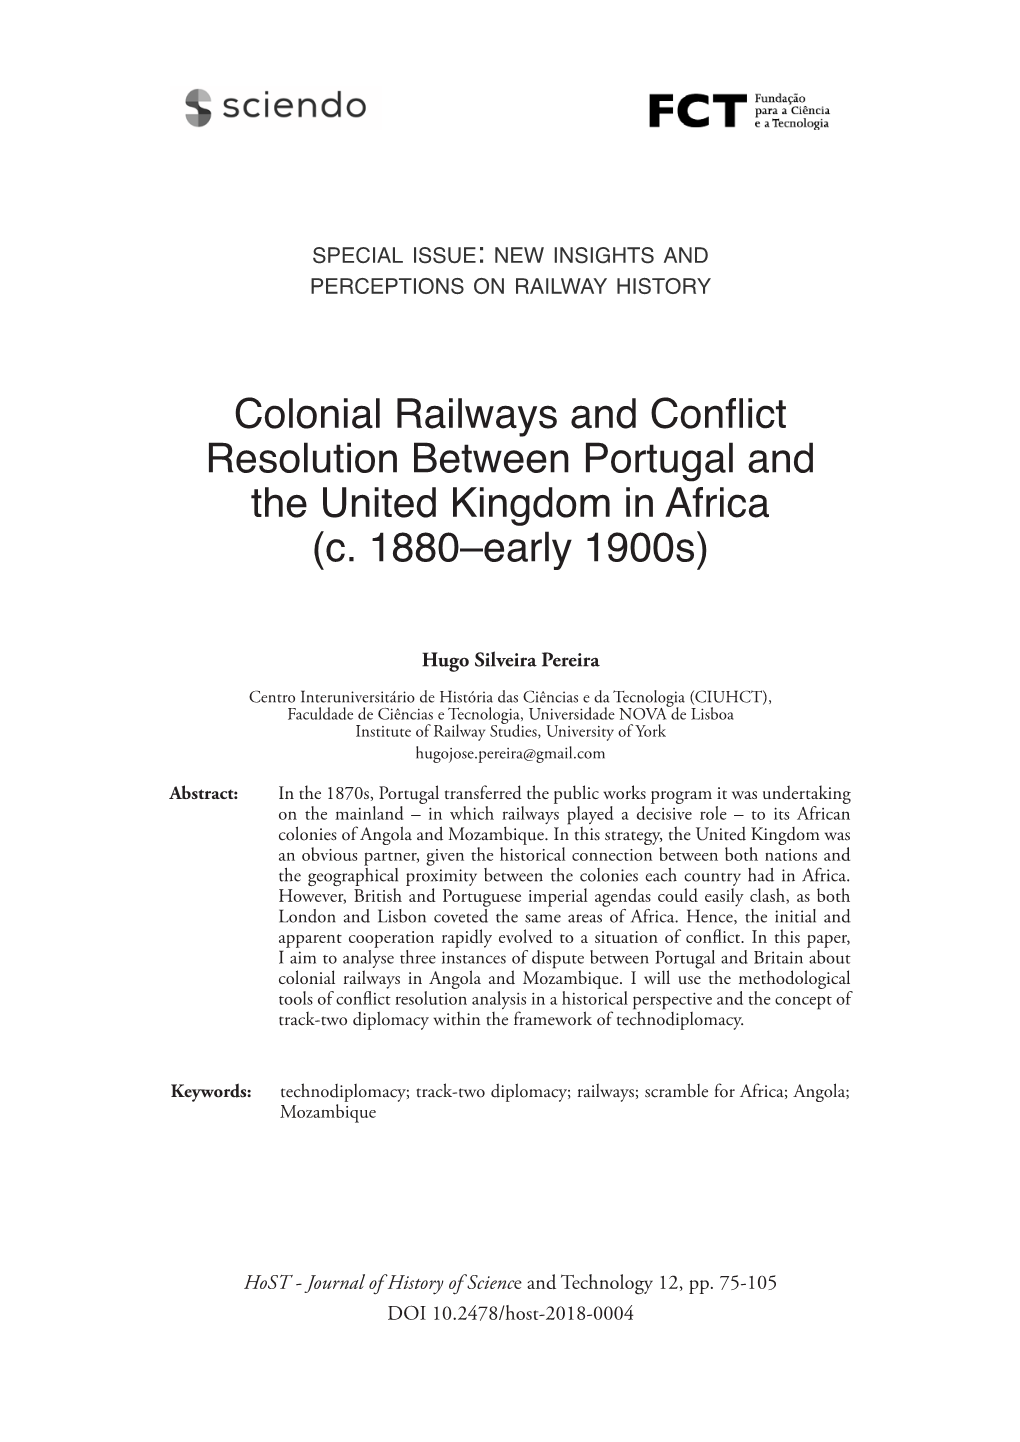 Colonial Railways and Conflict Resolution Between Portugal and the United Kingdom in Africa (C